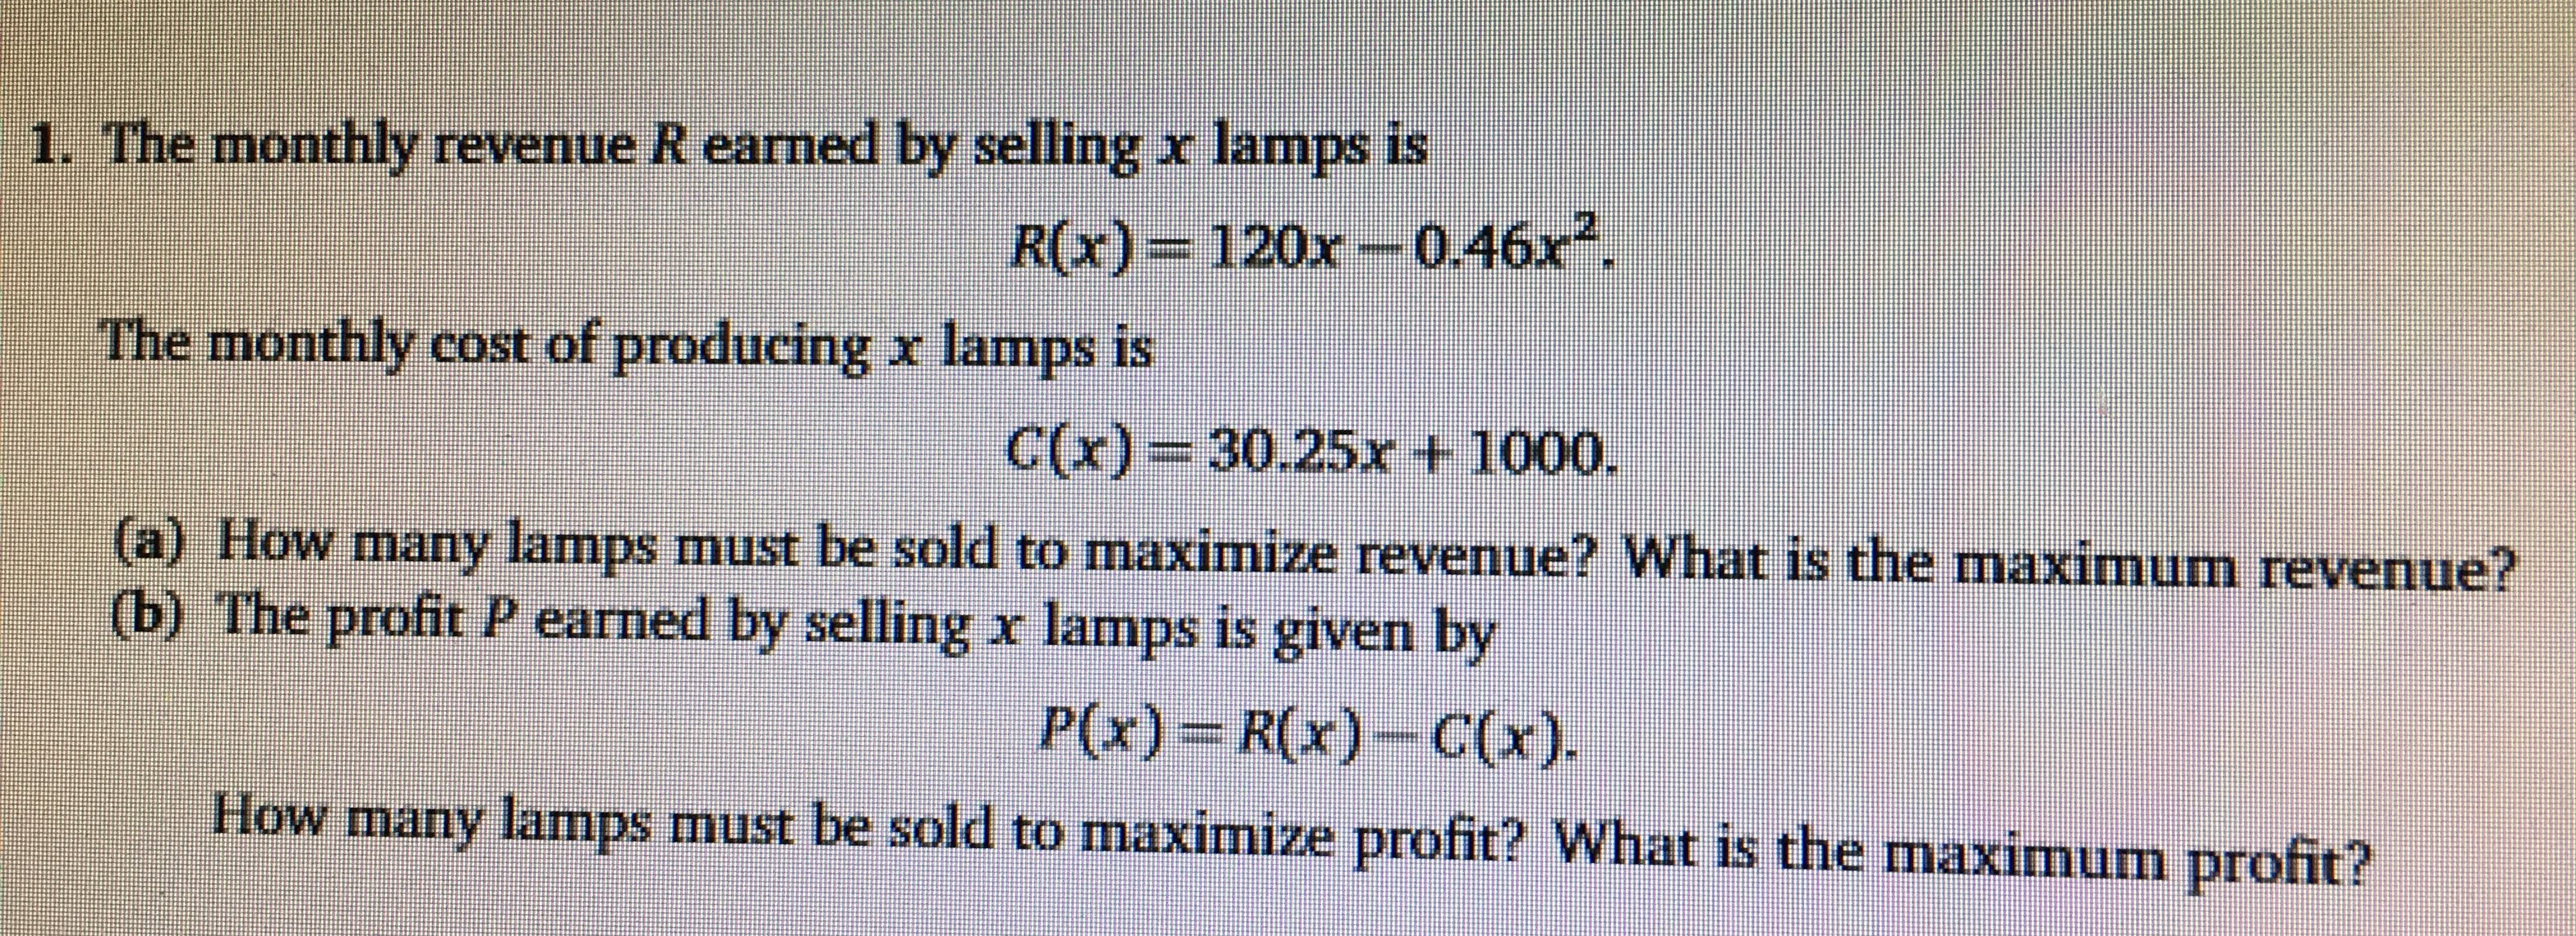 1. The monthly revenue R earned by selling x lamps is
R(x)= 120x-0.46x
The monthly cost of producing x lamps is
C(x) 30.25r t 1000.
a) How marny lamps must be sold to maximize revenue? What is the maximum revenue?
(b) The profit P earned by selling x lamps is given by
P(x) R(x)-C(x)
How many lamnps must be sold to maximize profit? What is the maximum profit?
